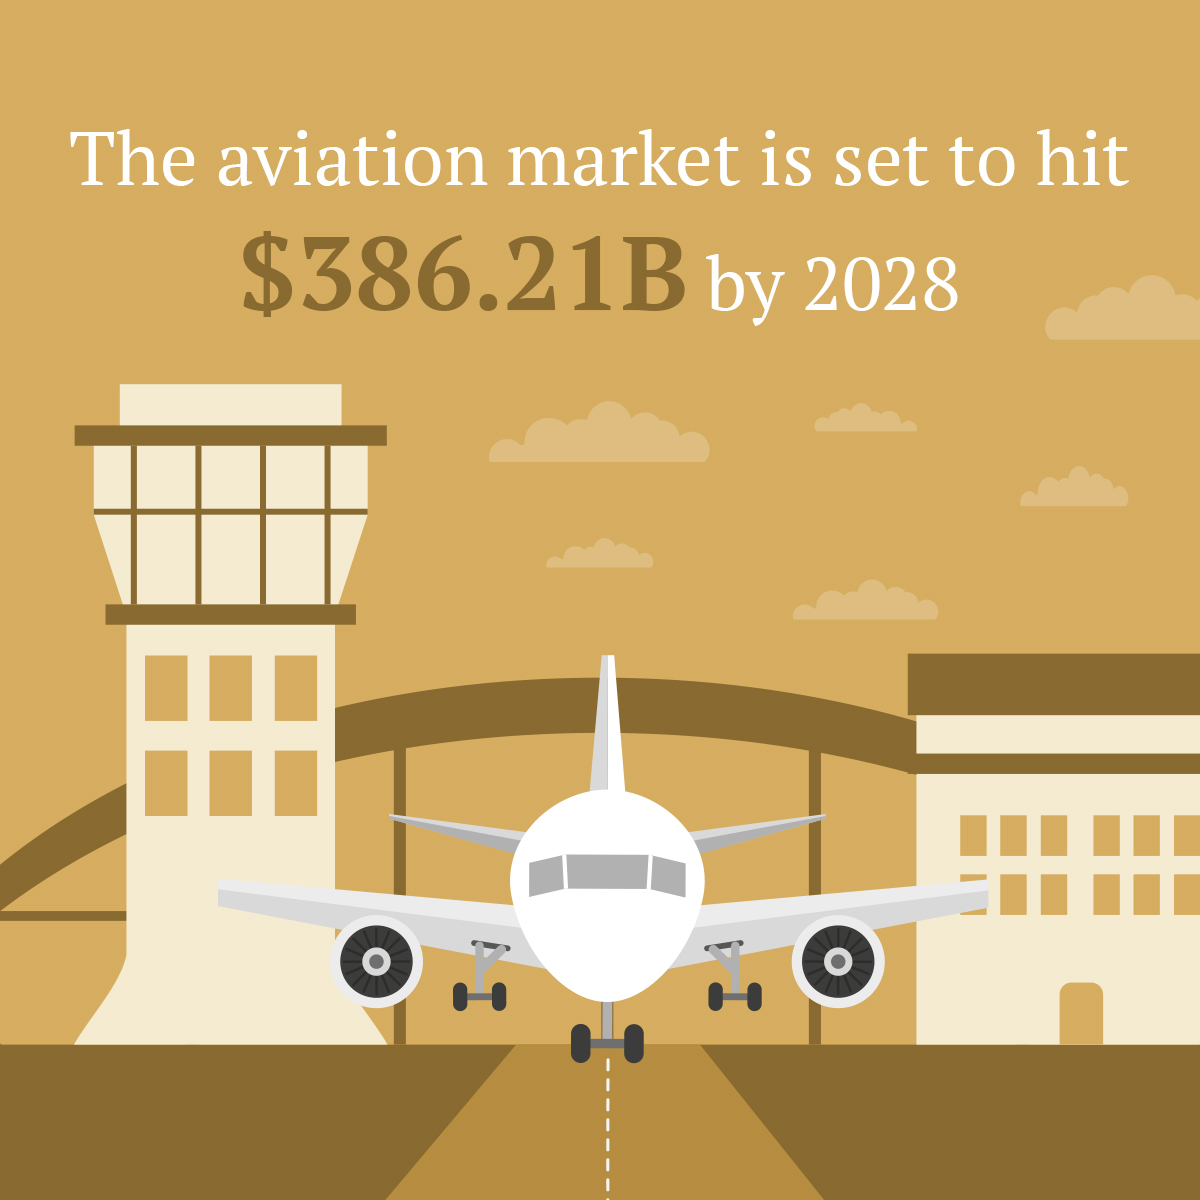 The aviation market is set to hit $386.21B by 2028